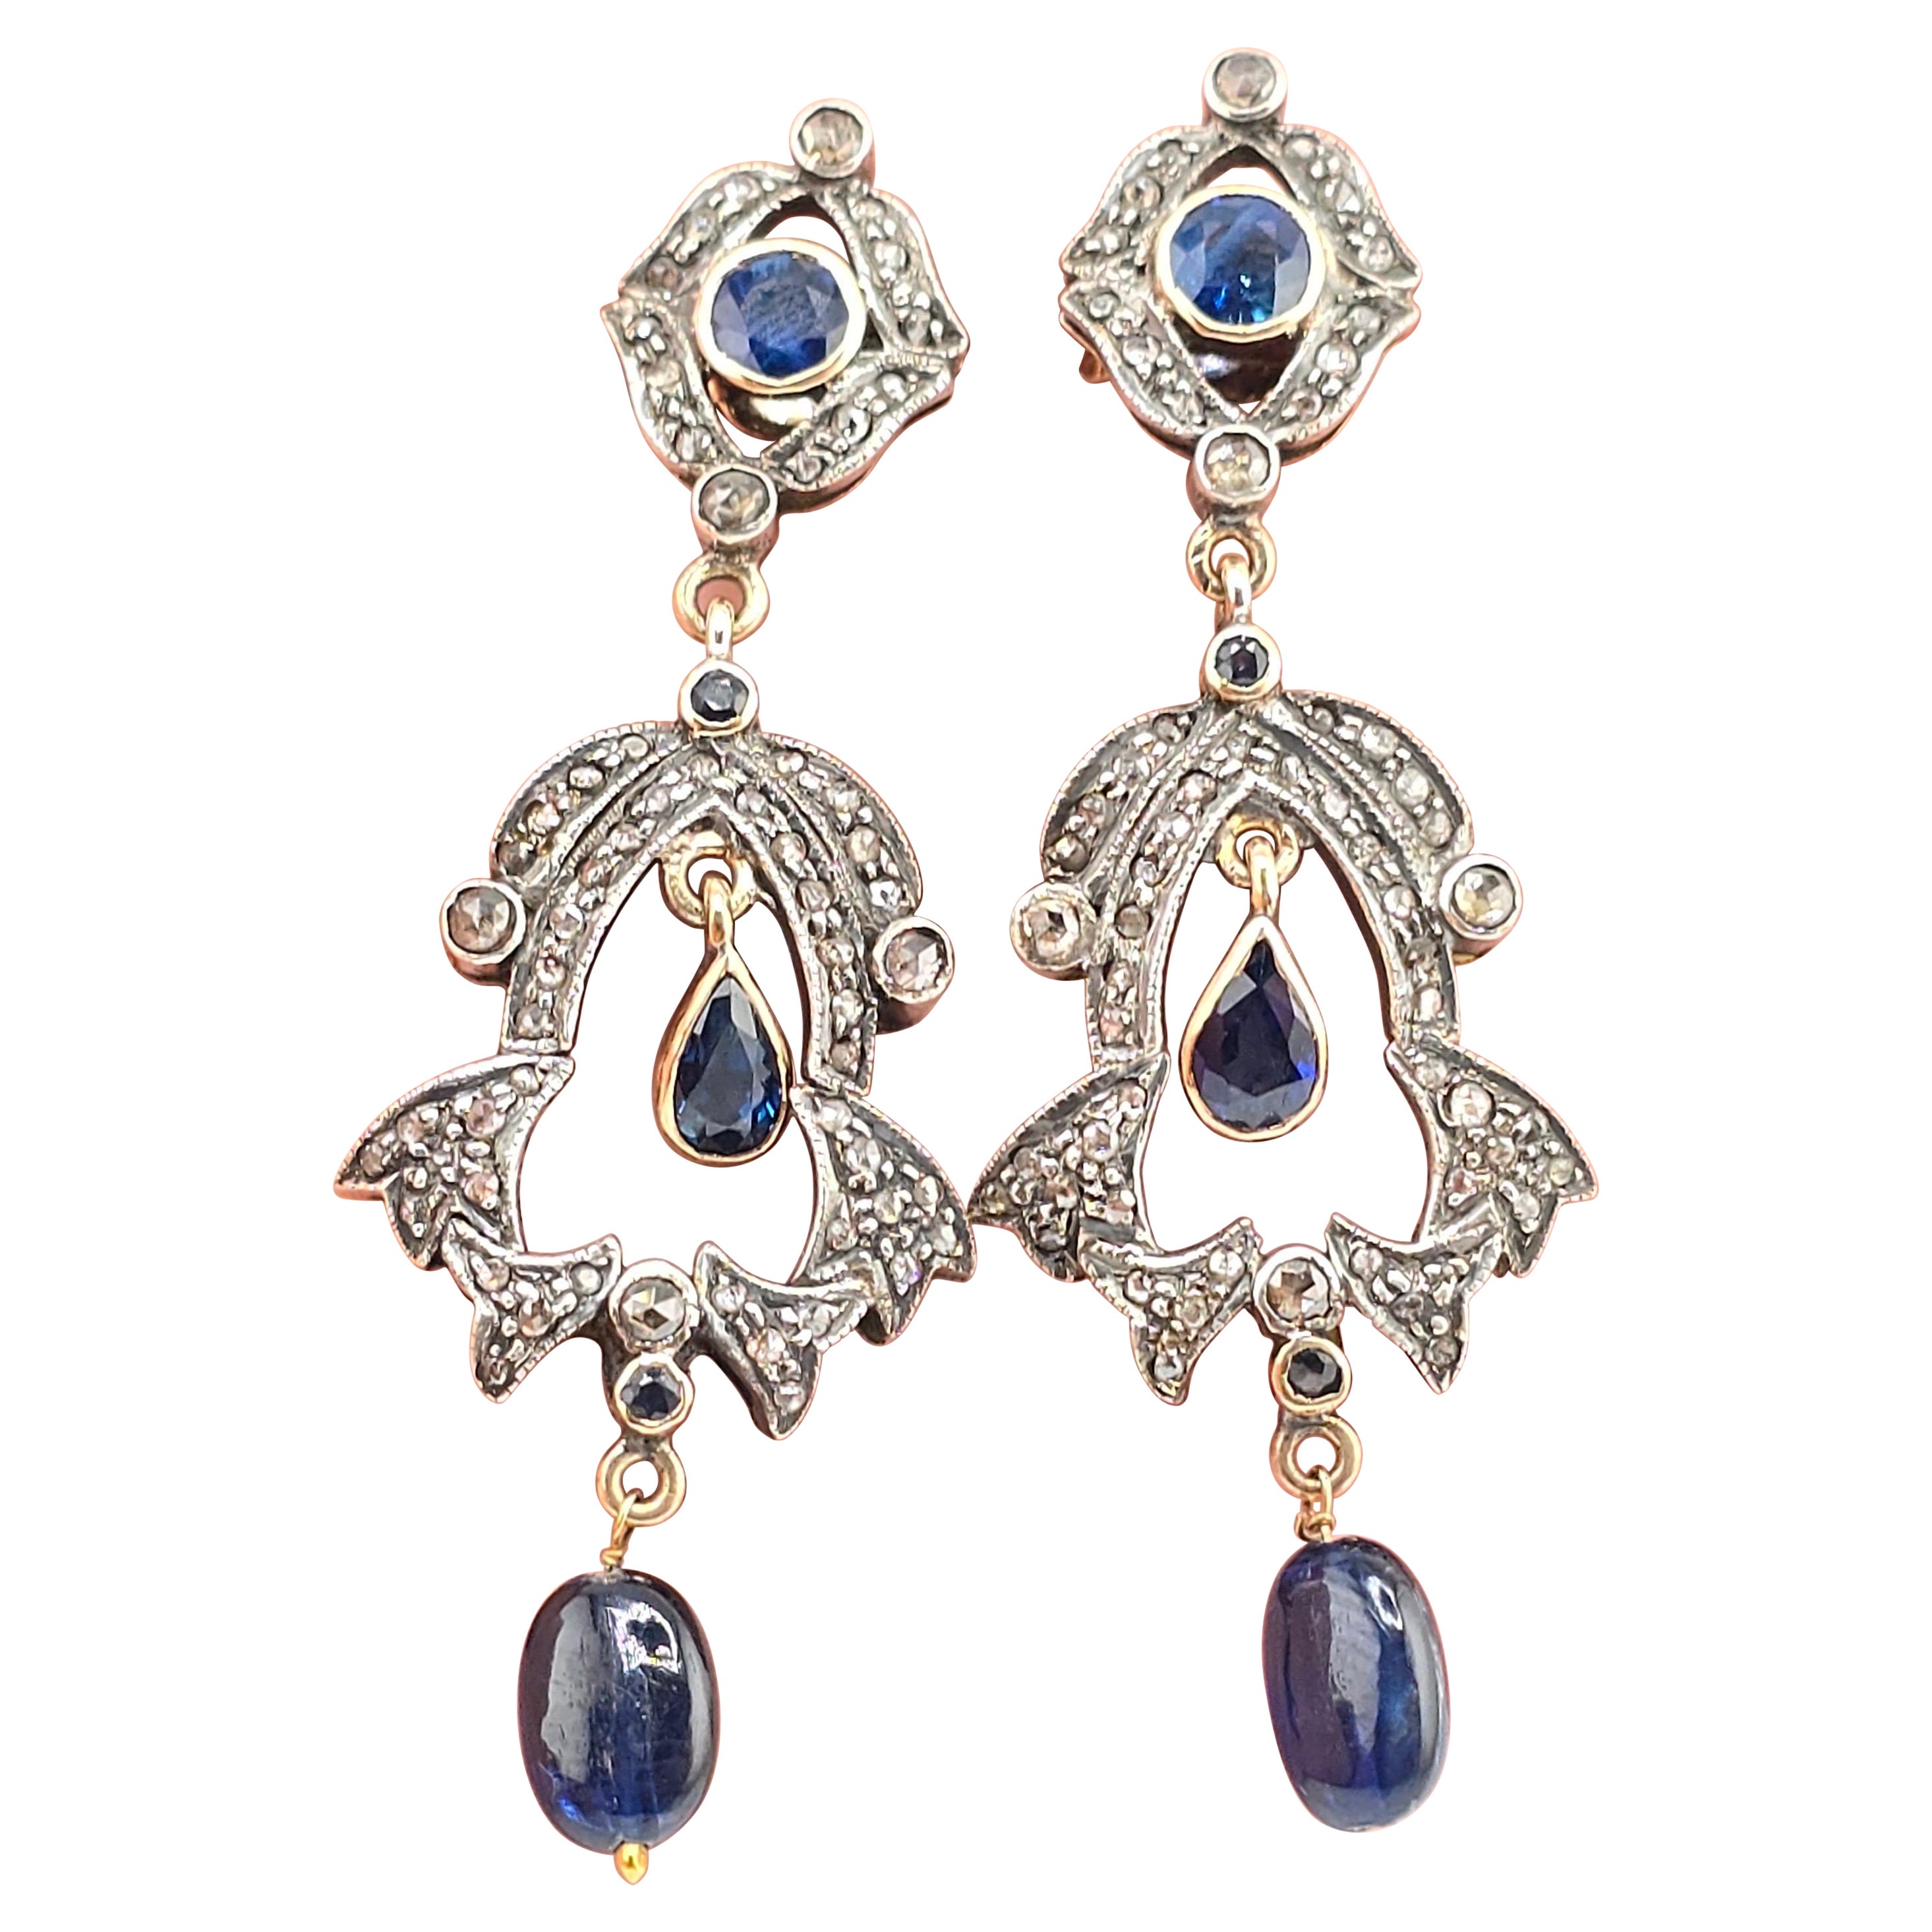 Rare Pair Of Victorian Diamond & Sapphire Earrings 14K & Sterling For Sale